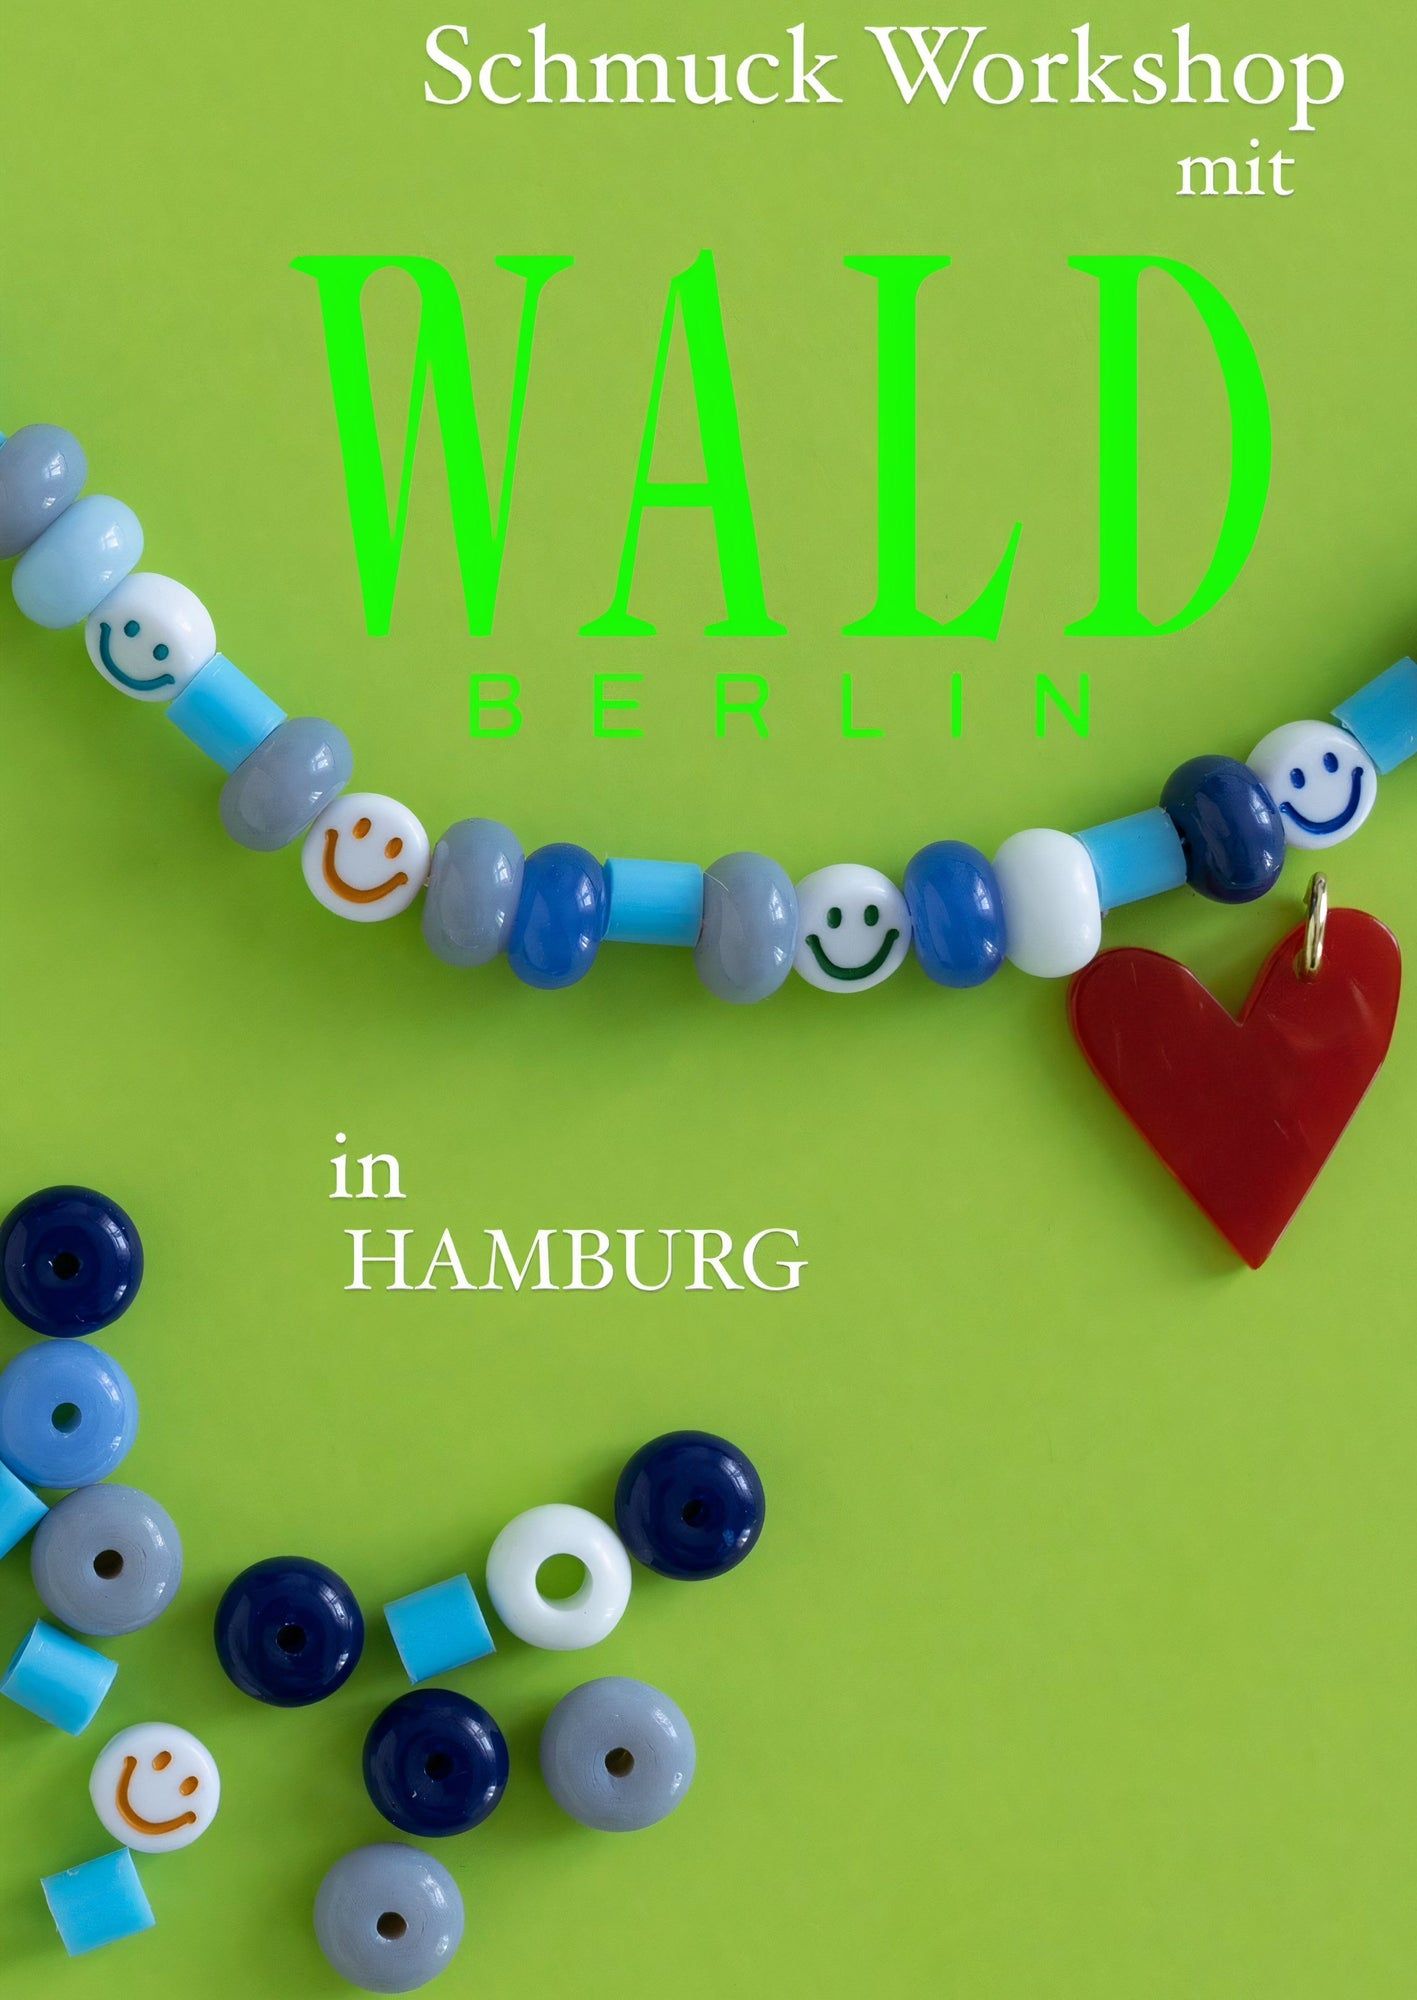 DIY Schmuck-Workshop in Hamburg poster for WALD Berlin, featuring playful beads like smiley faces and a red heart charm. Join us in Hamburg for a fun DIY Schmuck-Workshop!